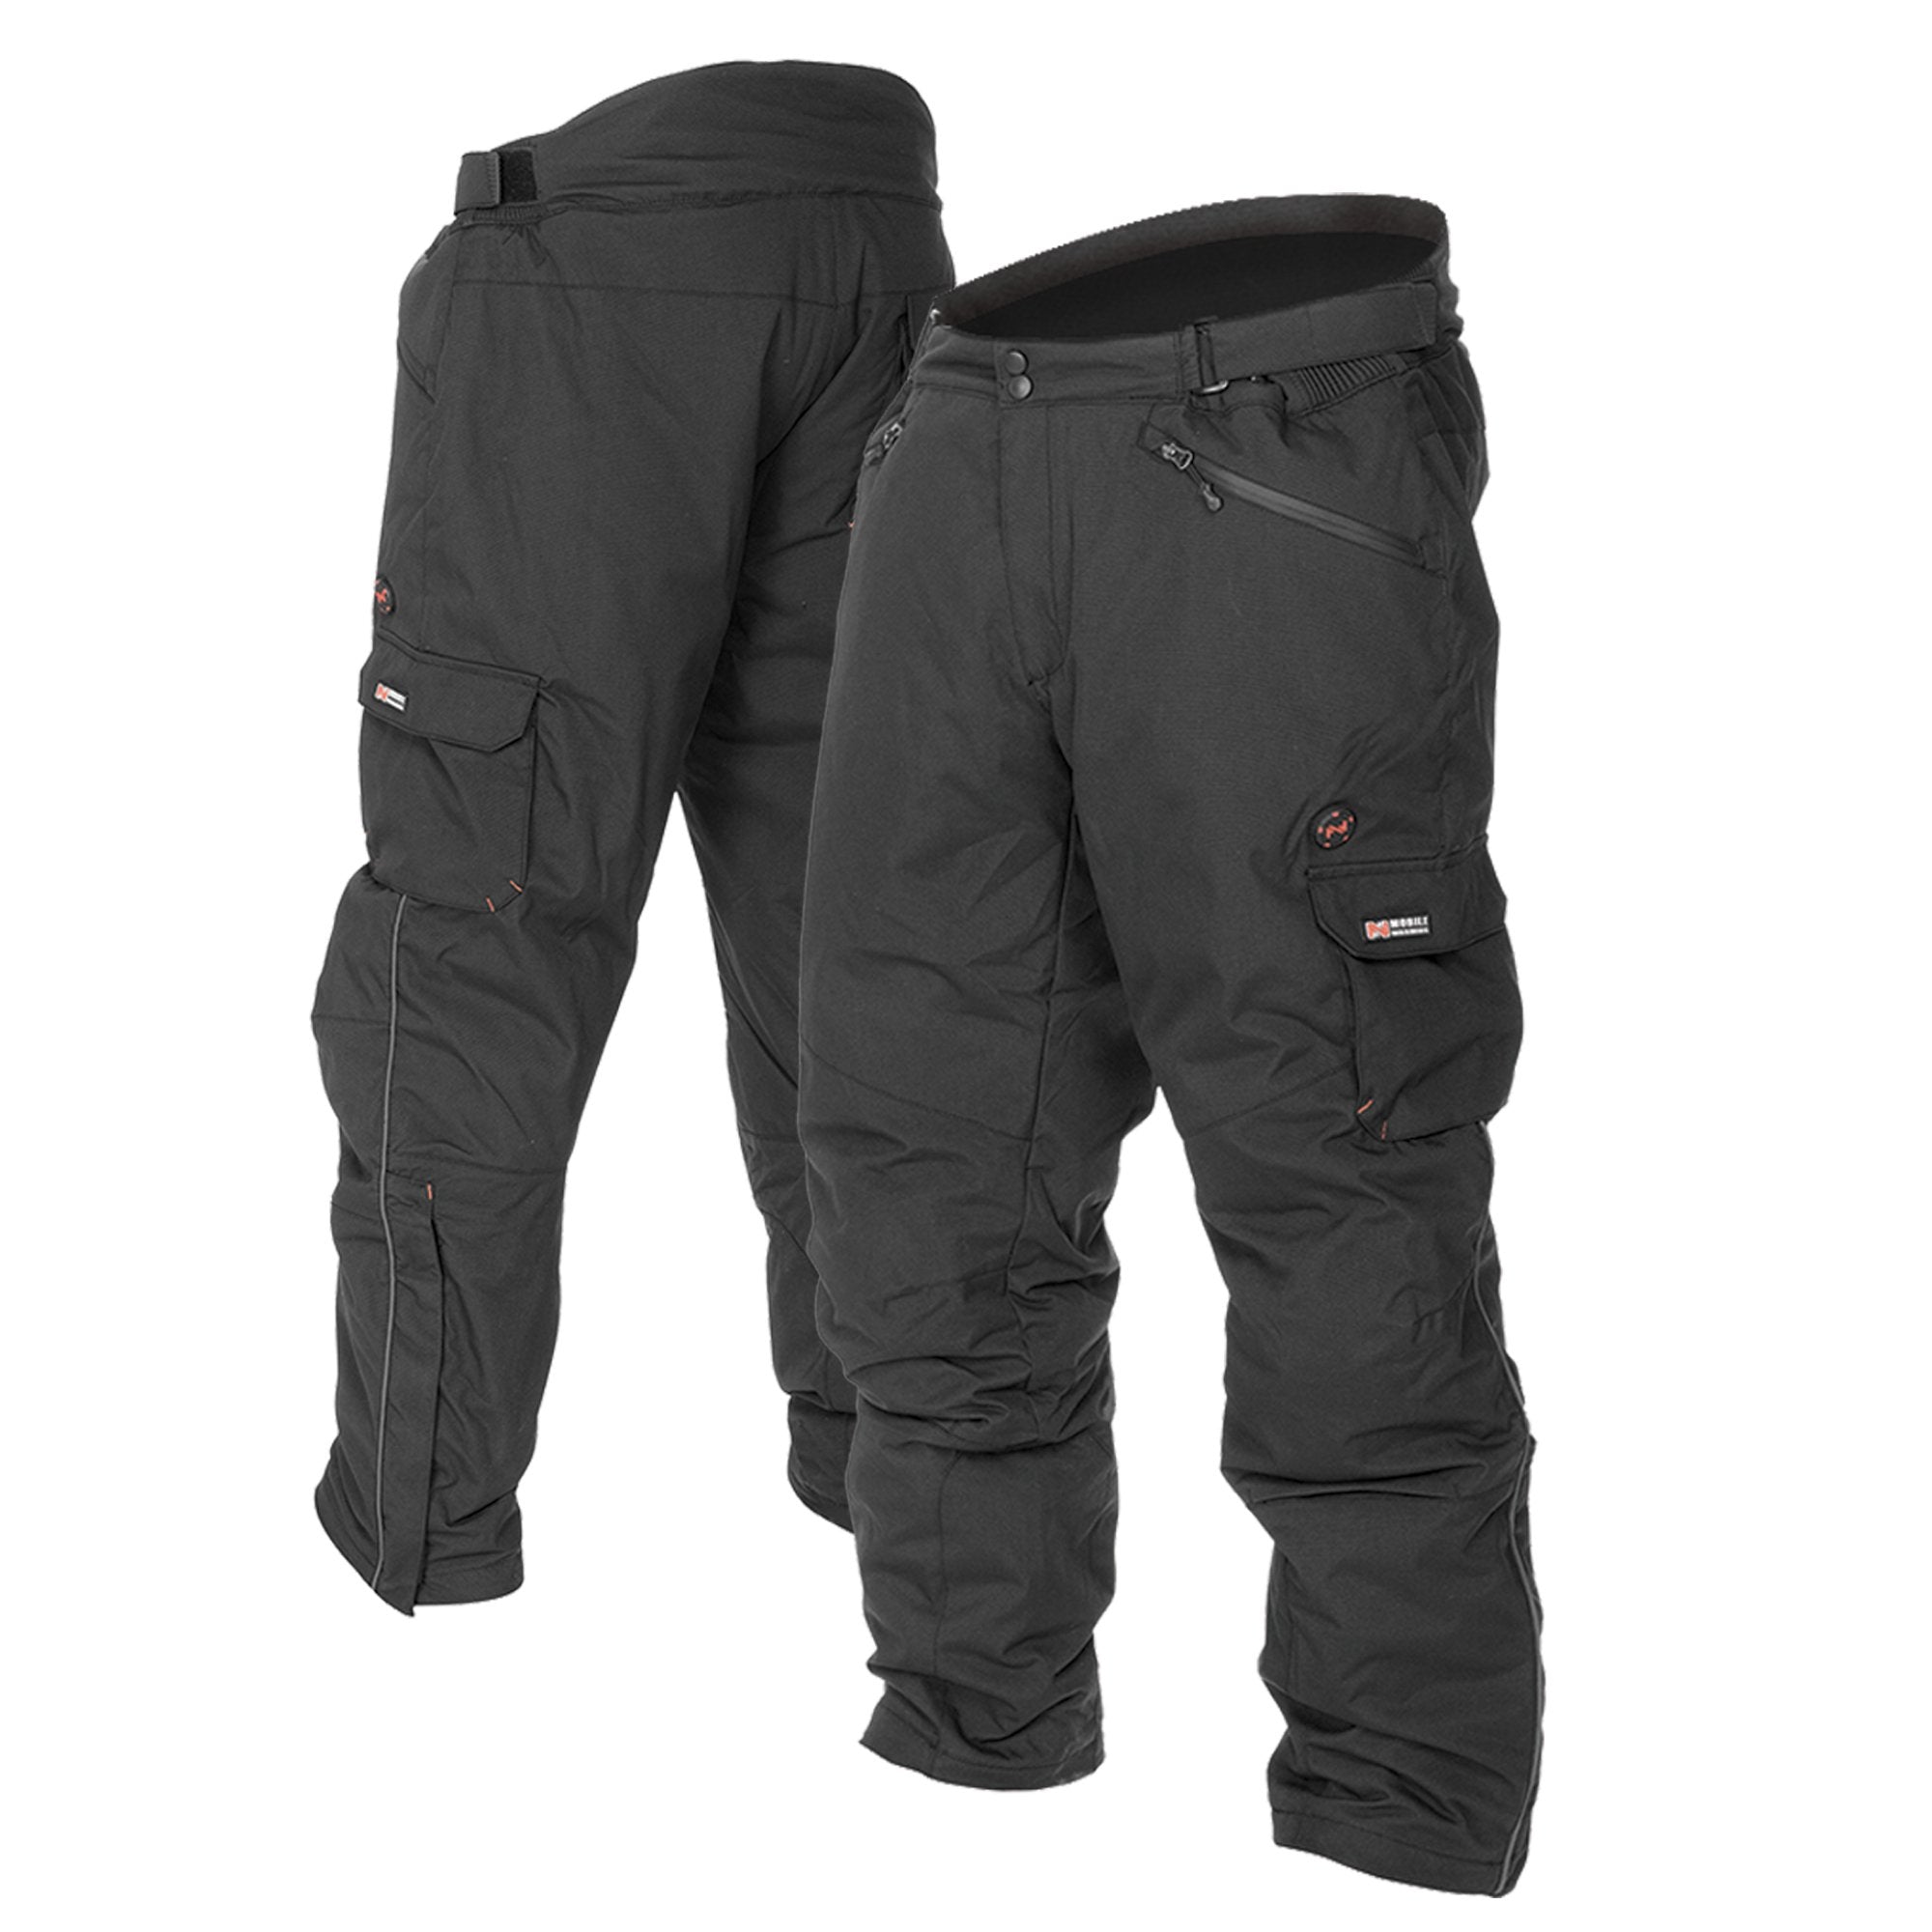 Outdoor Thermal Tactical Pants Men Winter Electric Usb Heated Trousers Usb  Heater Hunting Pants Heated Clothing Child Sweatpants